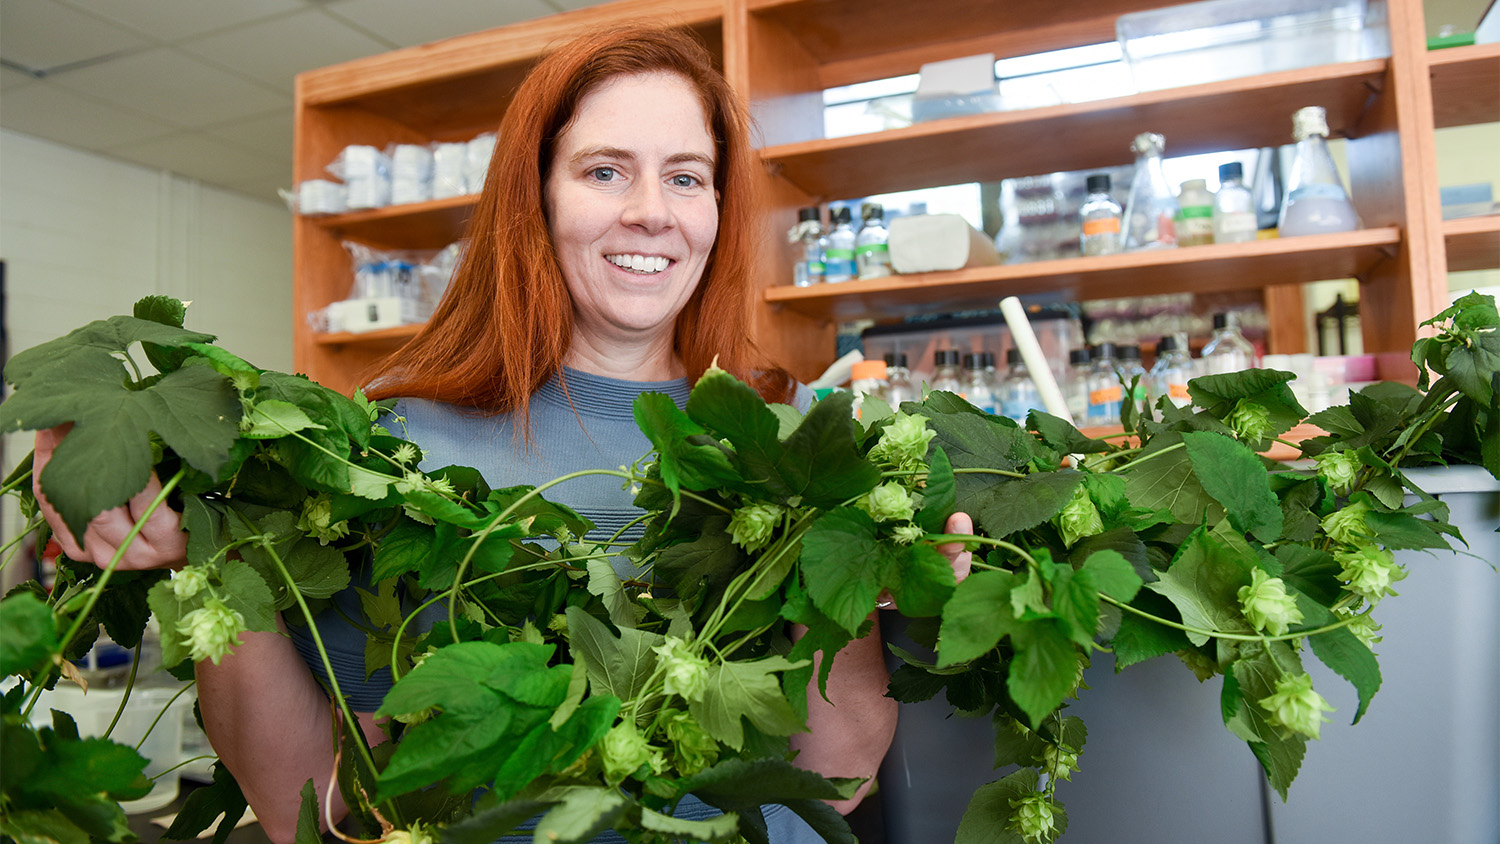 NC State&#039;s Dr. Colleen Doherty studies the circadian rhythm of plants. Among the projects she&#039;s involved with: finding ways to make hops plants more suitable for North Carolina day length.